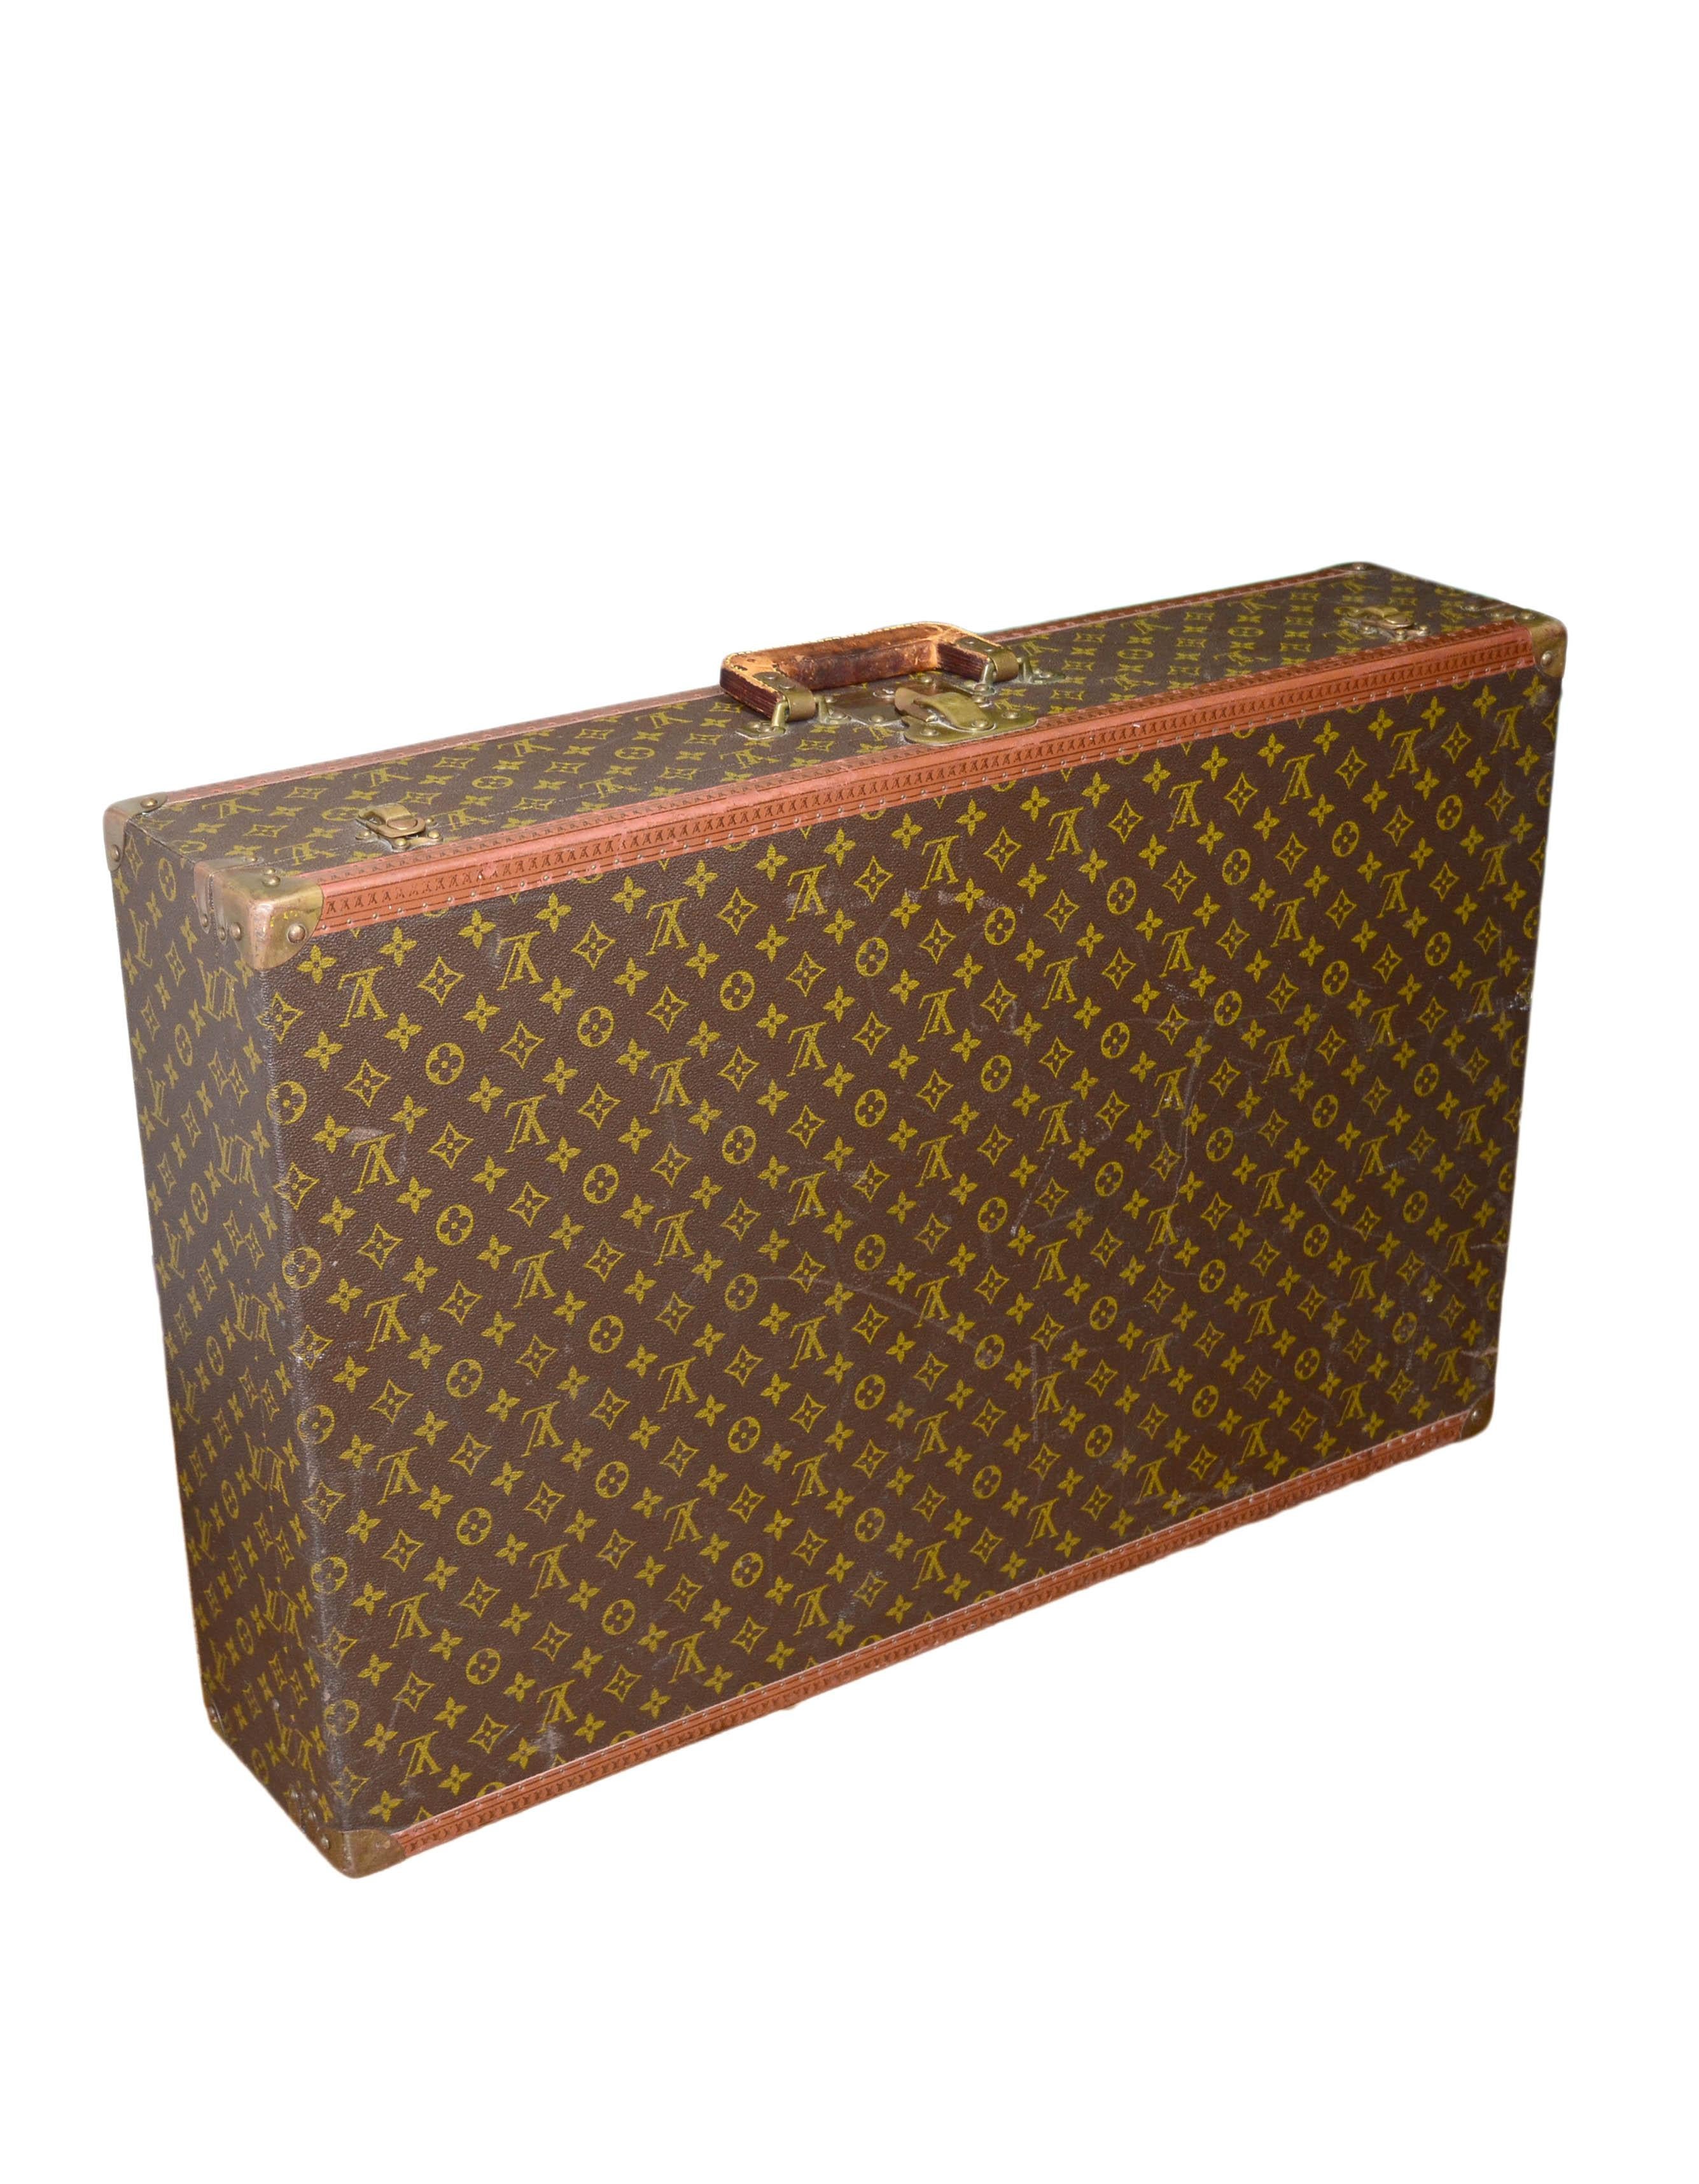 Louis Vuitton Vintage Monogram Hardcase Bisten 80

Made In: France
Year of Production: Circa 1960s/1970s
Color: Brown
Hardware:Brass
Materials: Monogram coated canvas with leather trim and golden brass corners
Lining: Beige canvas
Closure/Opening: